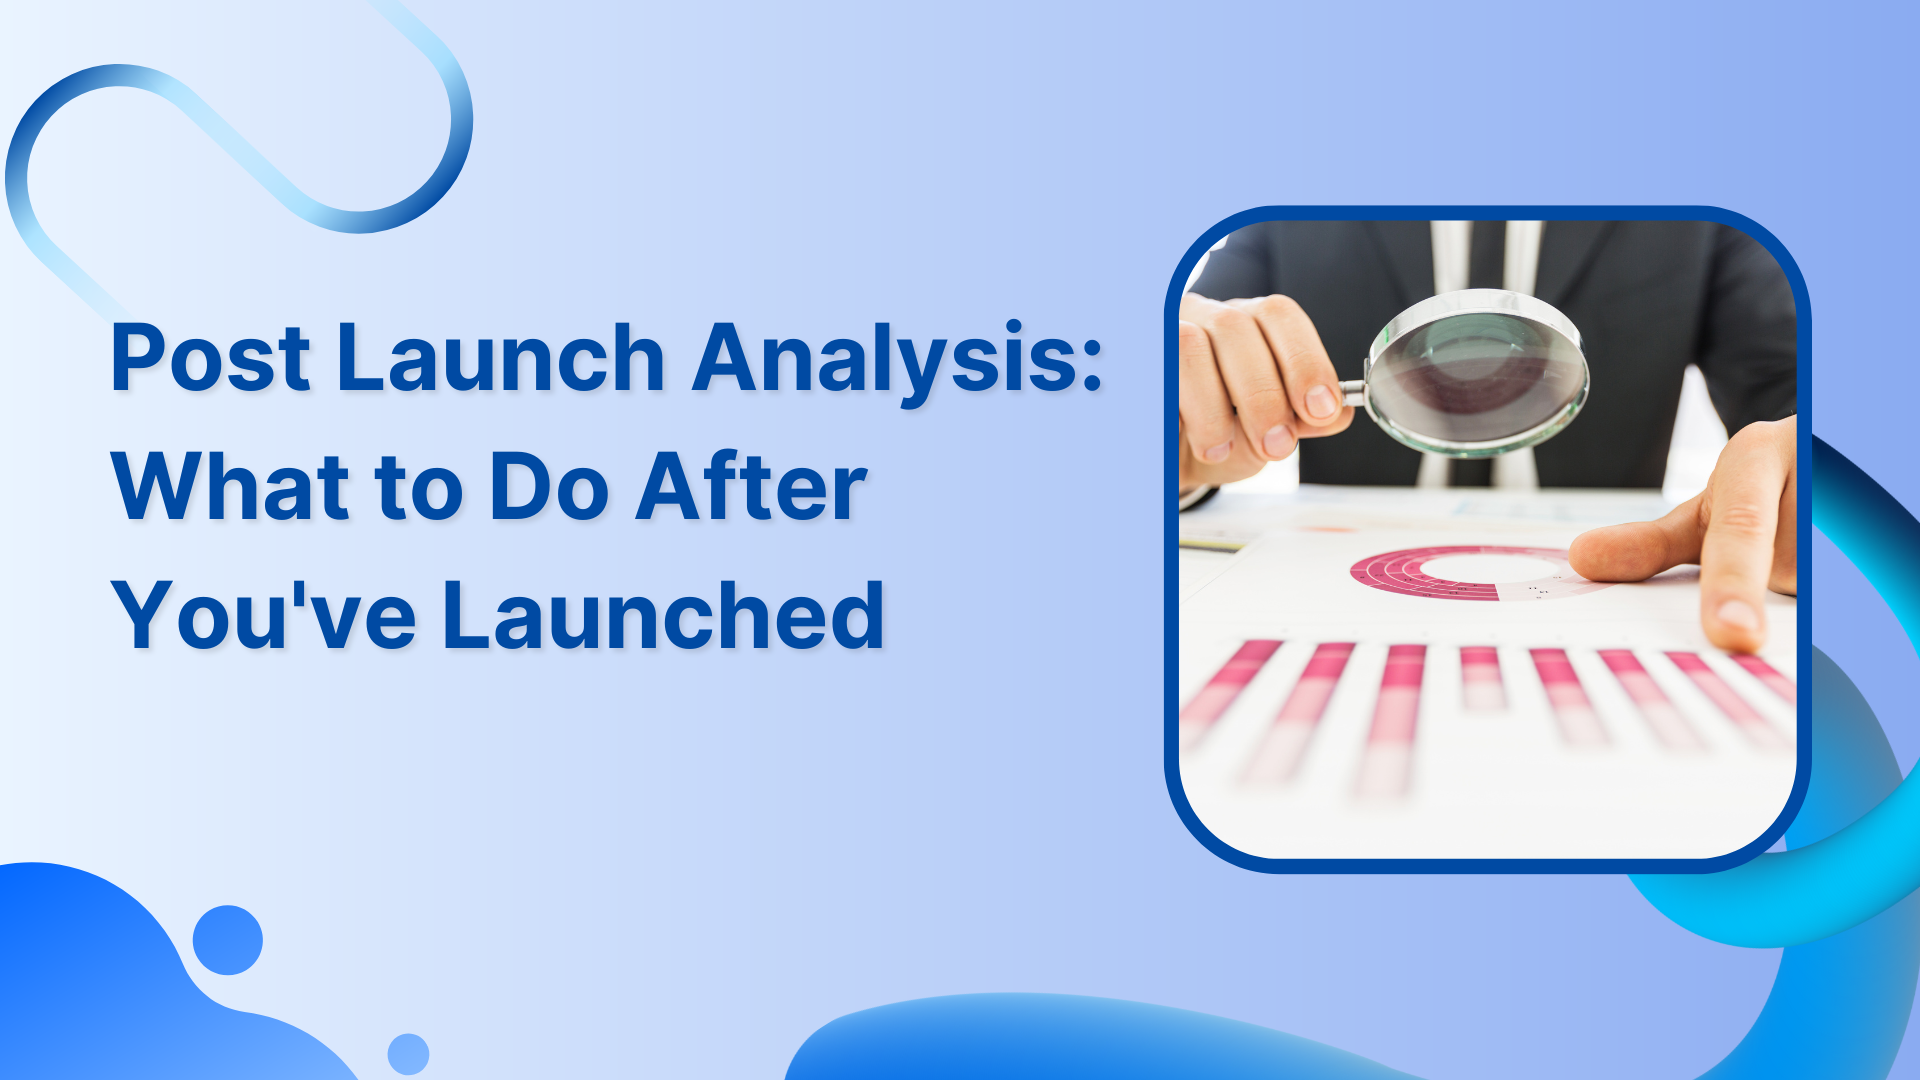 Post Launch Analysis: What to Do After You've Launched